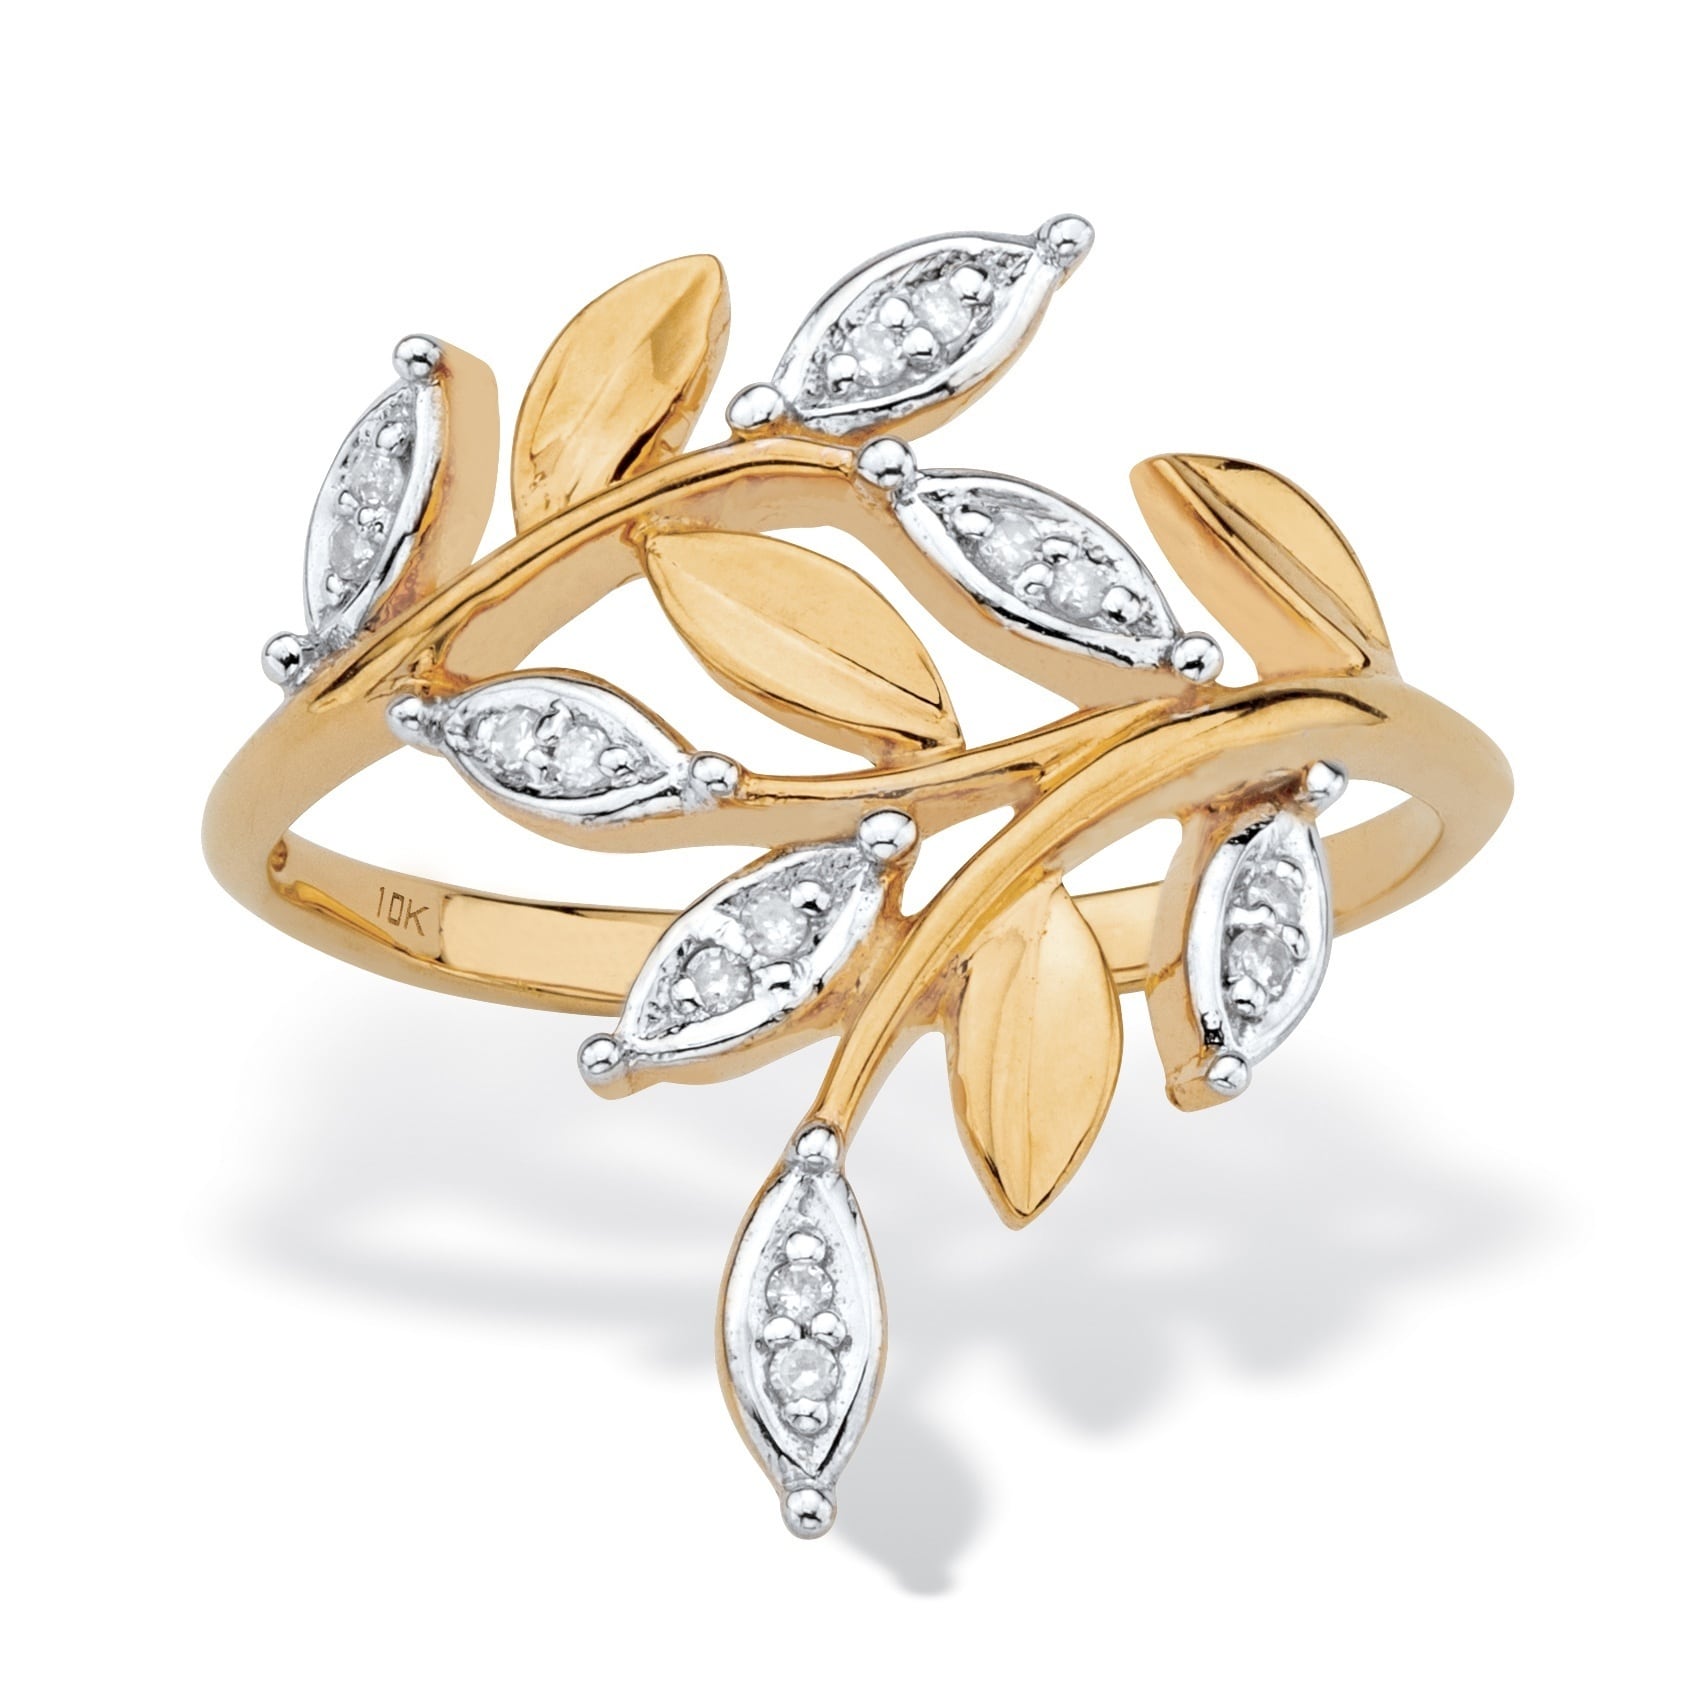 Jewel Zone US White Cubic Zirconia Leaf Design Bypass Ring in 14k Gold Over Sterling Silver